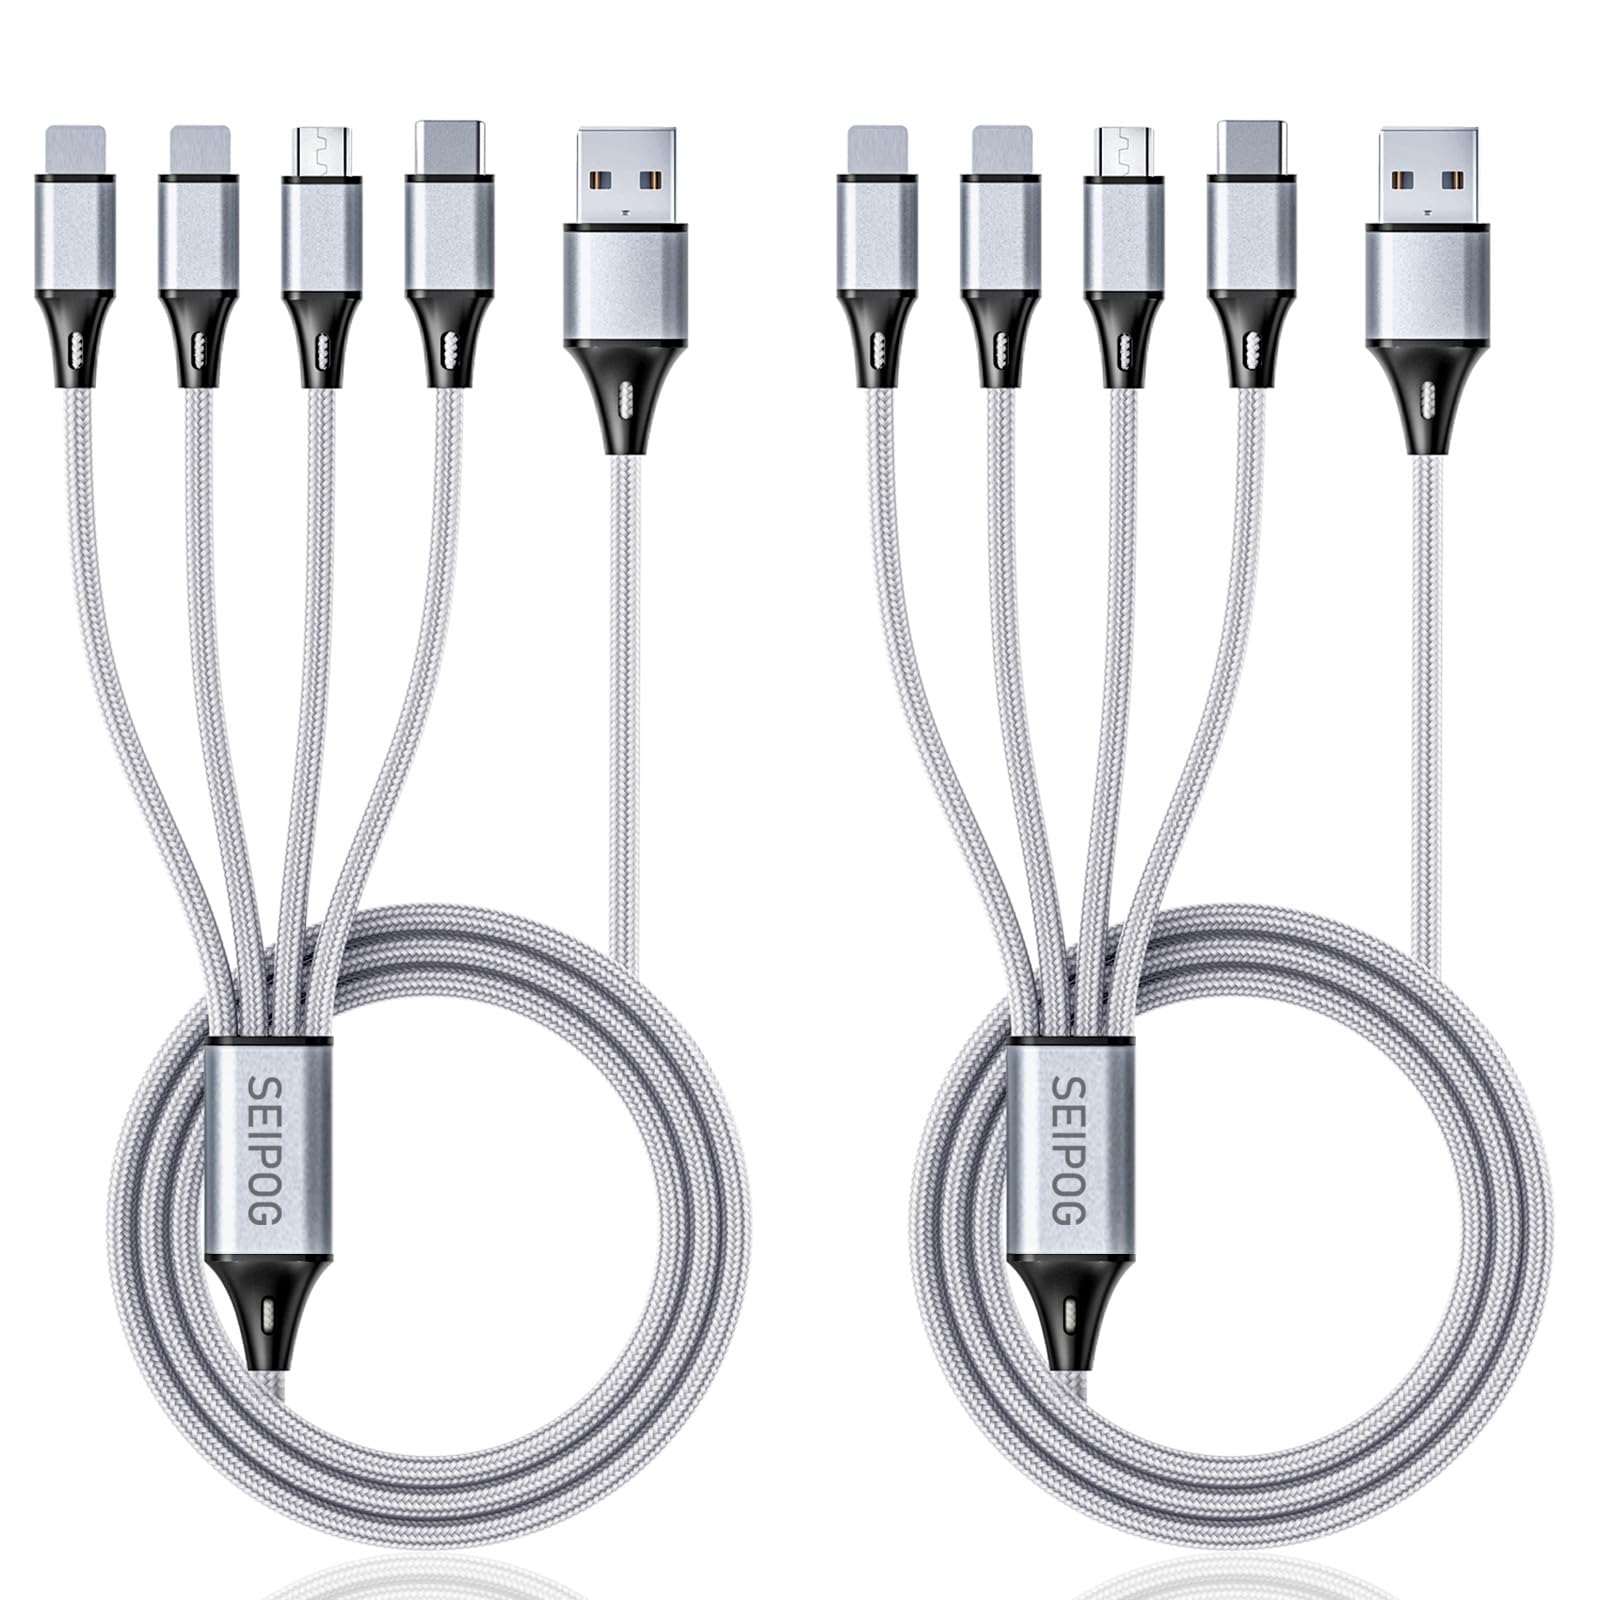 A picture of different types of charging cables and adapters.